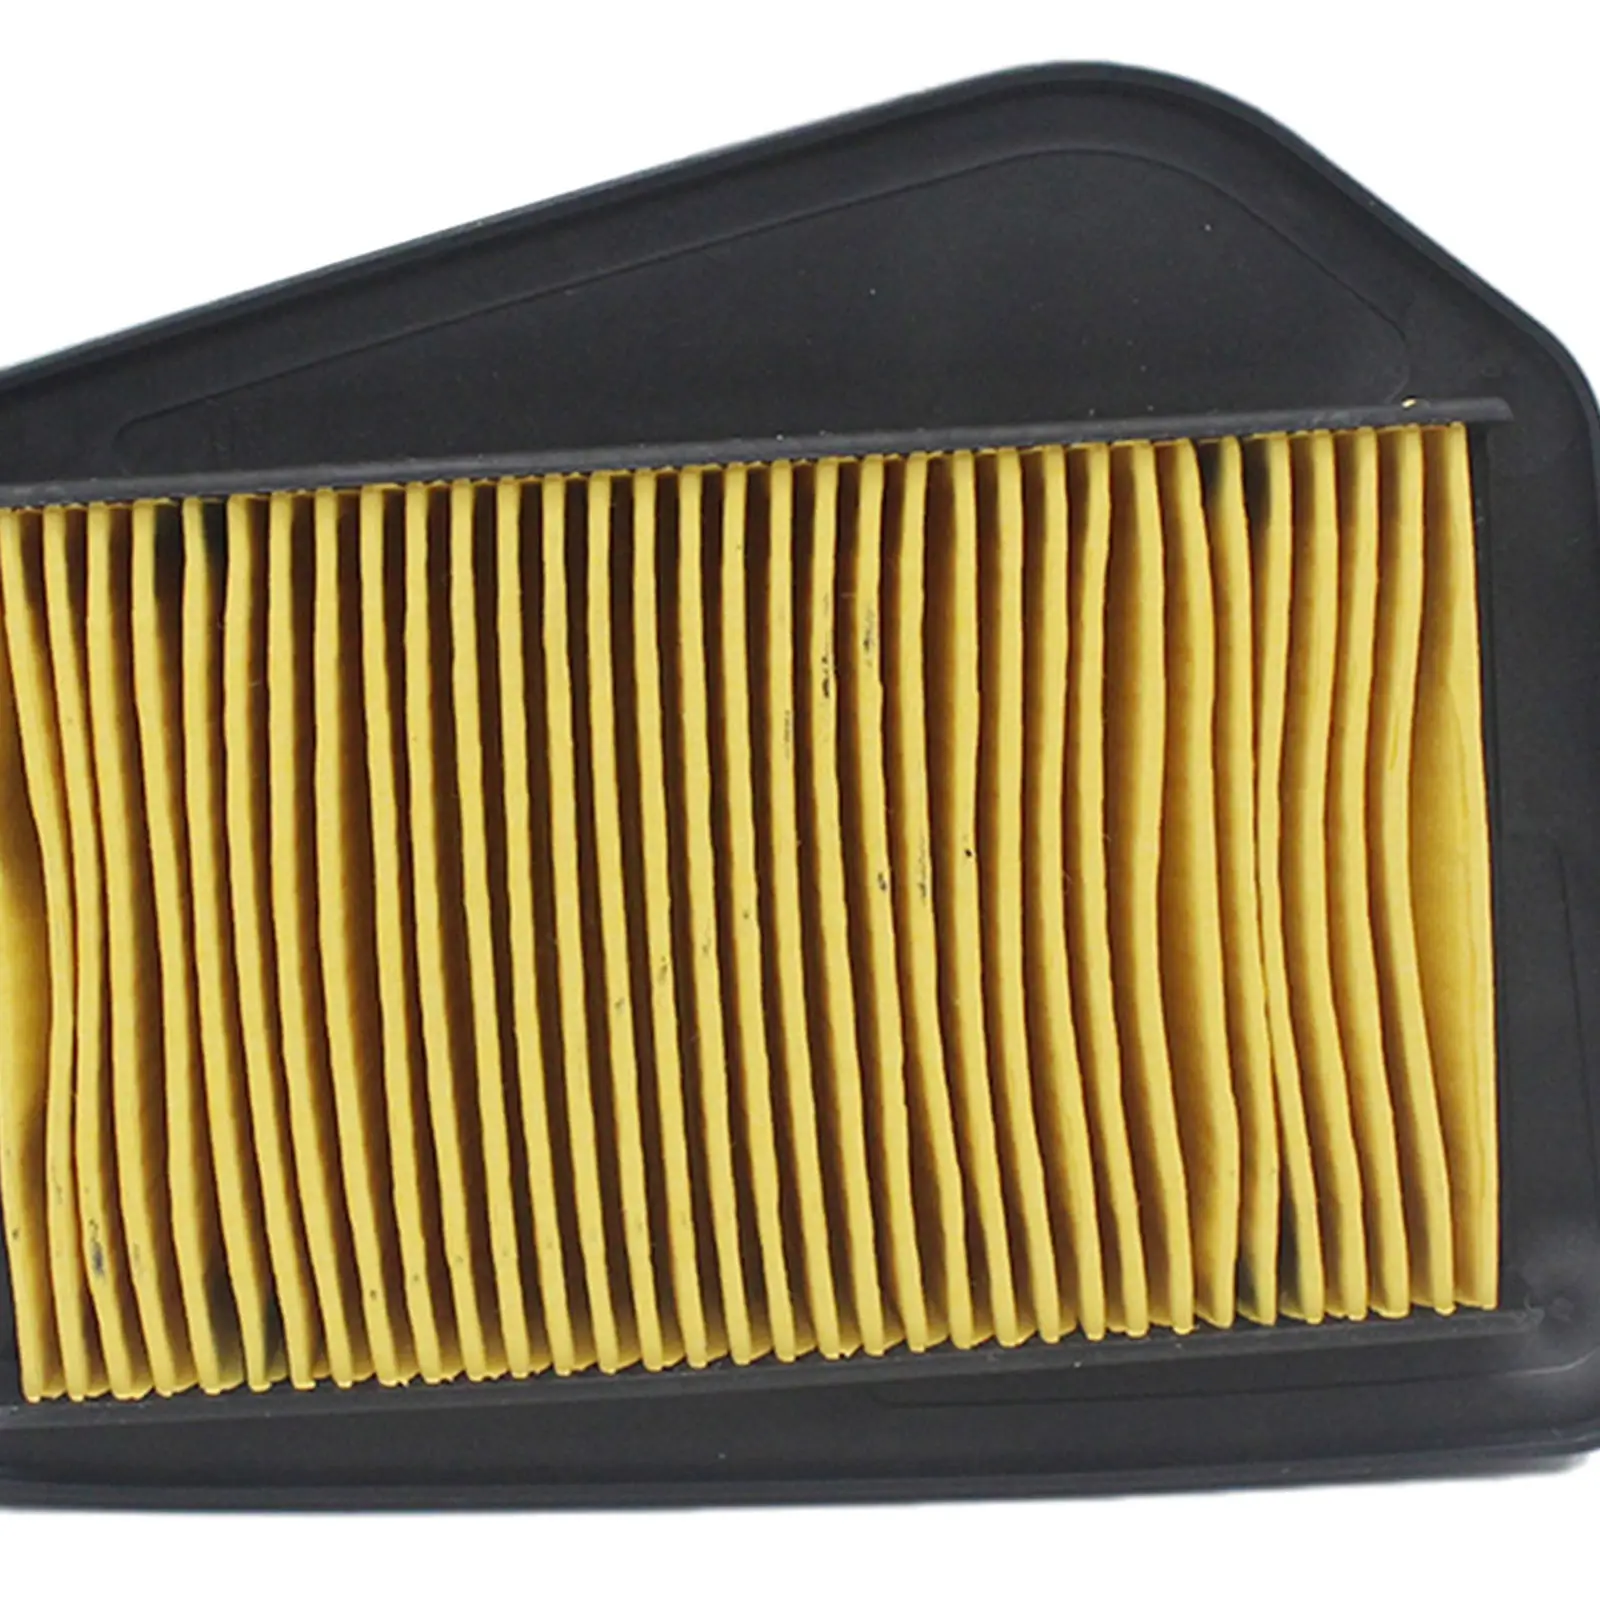 Air Filter Replaces fits for Honda CBR125 CBR 125 2004-2010, Spare Parts